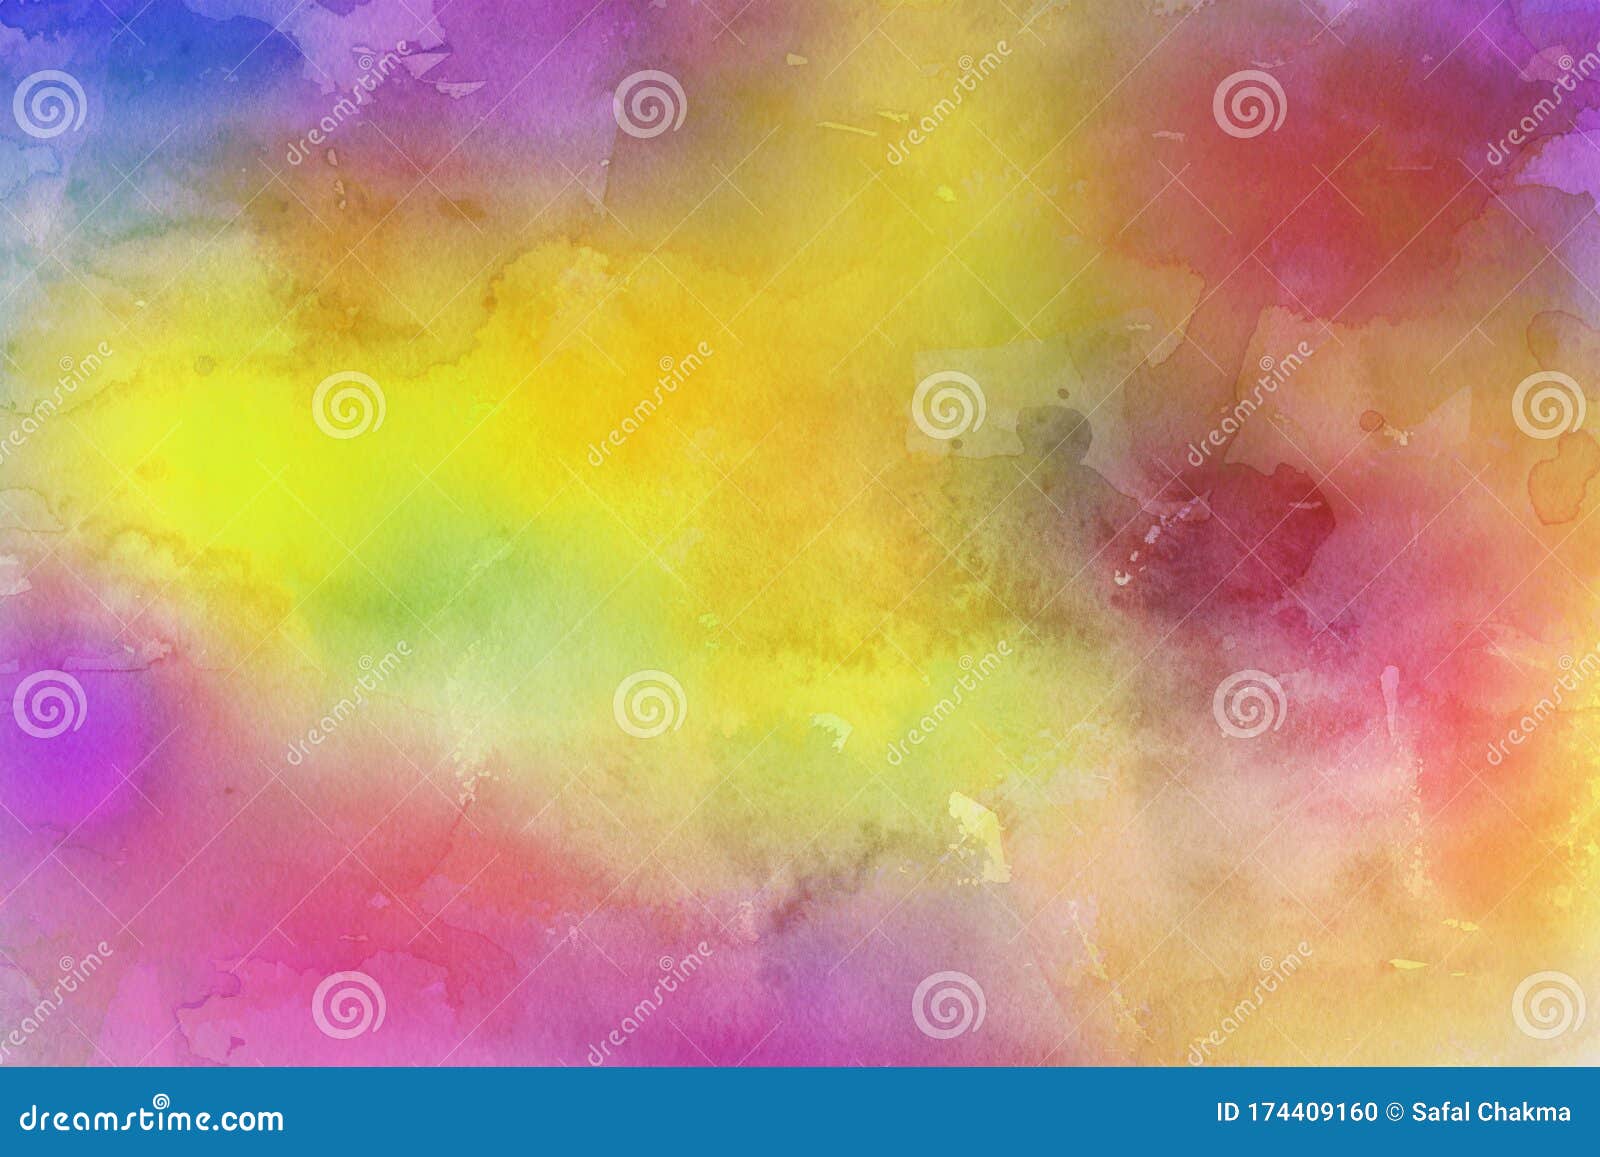 High Resolution Colorful Textured Background. Stock Photo - Image of ...